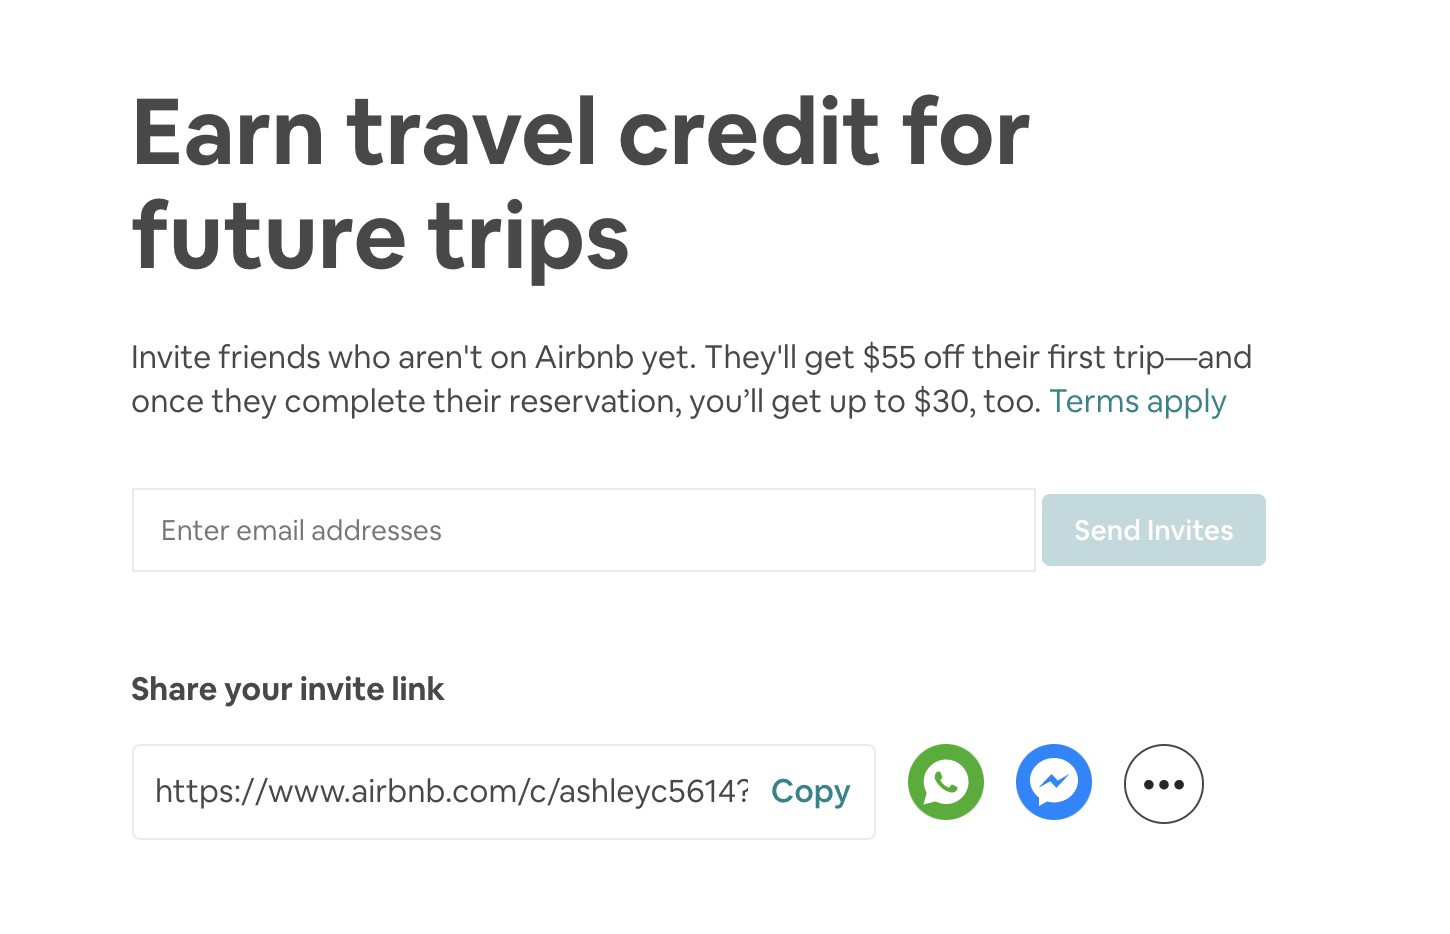 ecommerce referral program example from airbnb